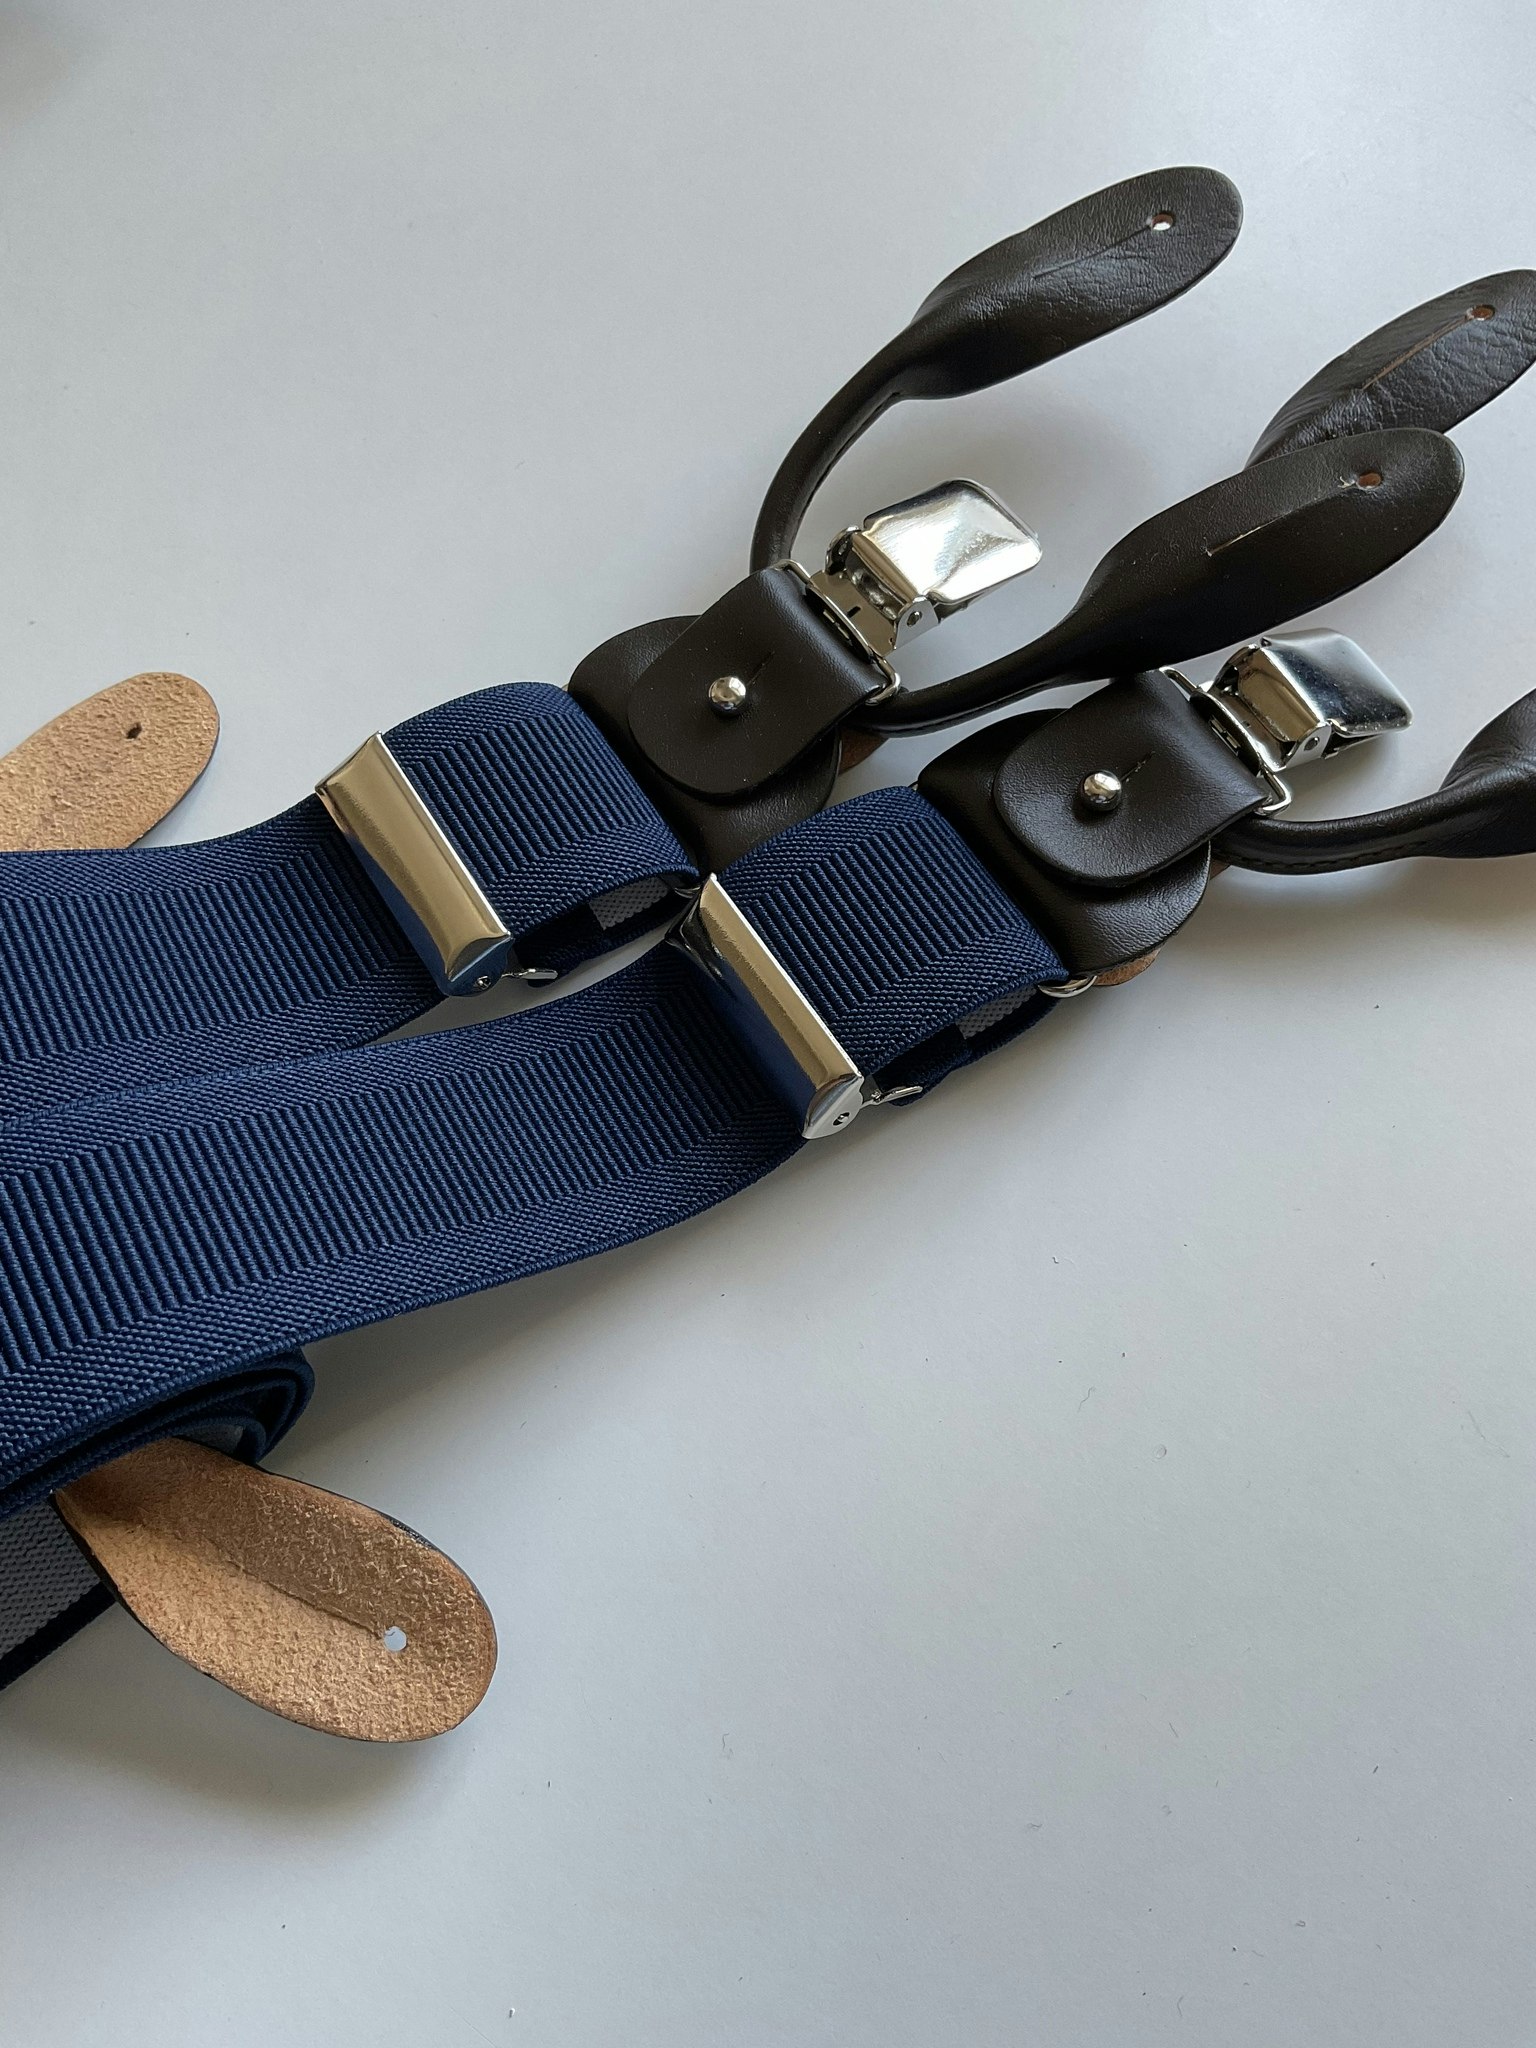 Solid Suspenders Stretch - Navy Blue